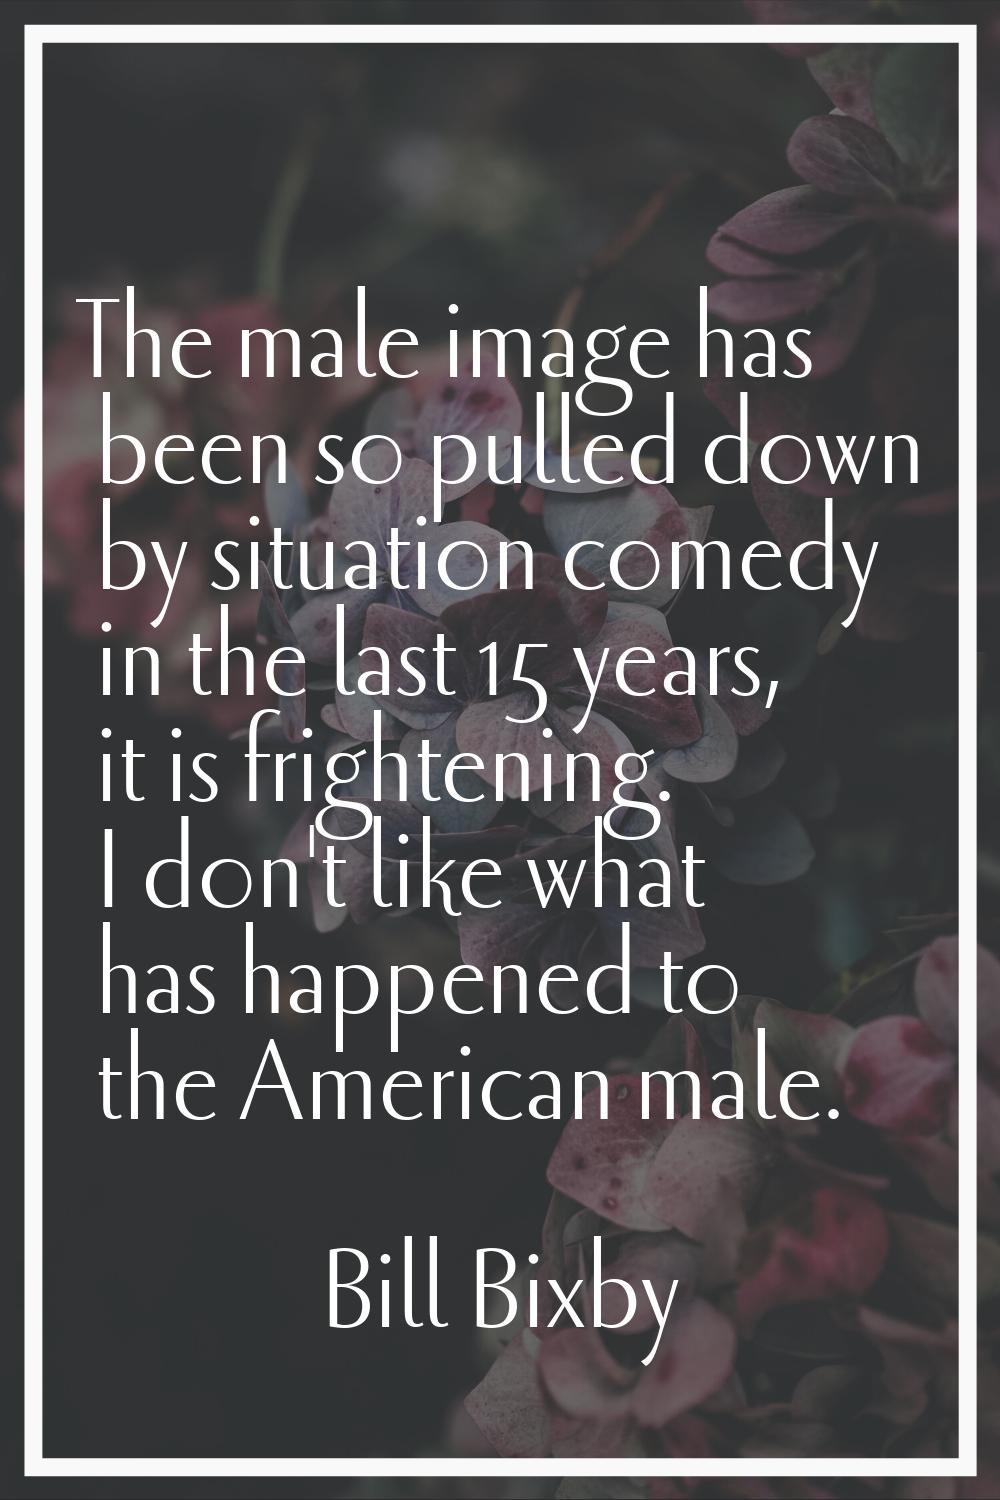 The male image has been so pulled down by situation comedy in the last 15 years, it is frightening.